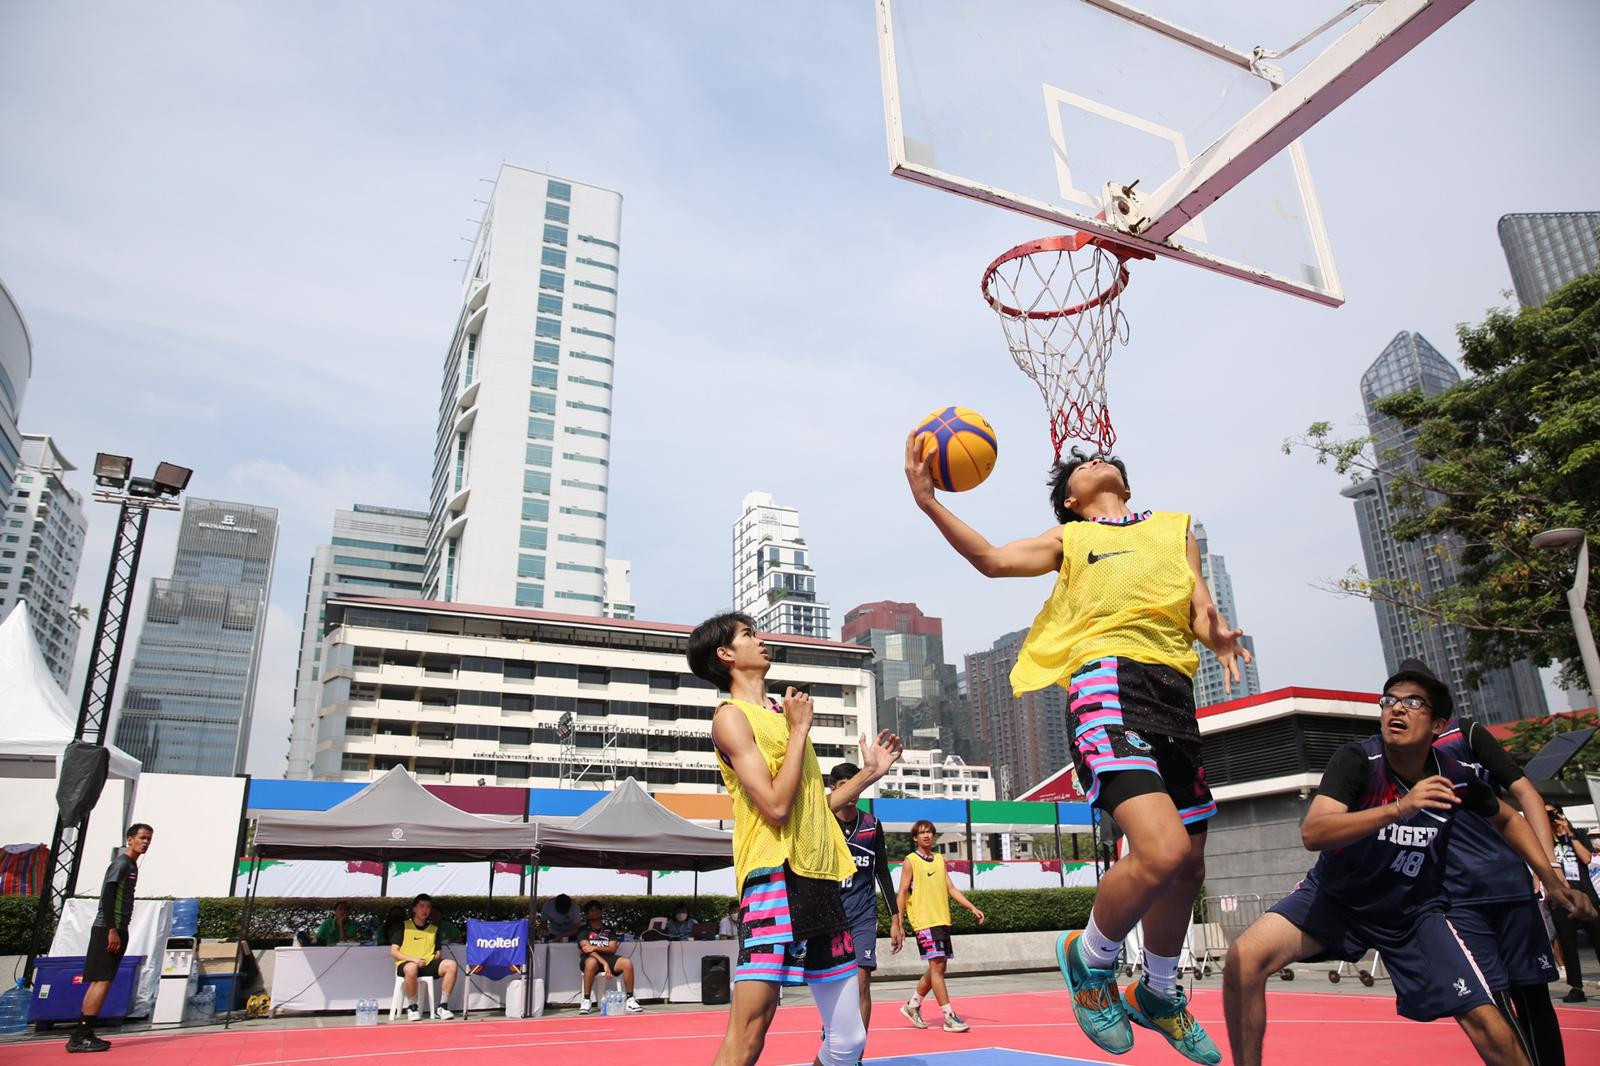 3x3 basketball was popular among youth and fans equally ©UTS